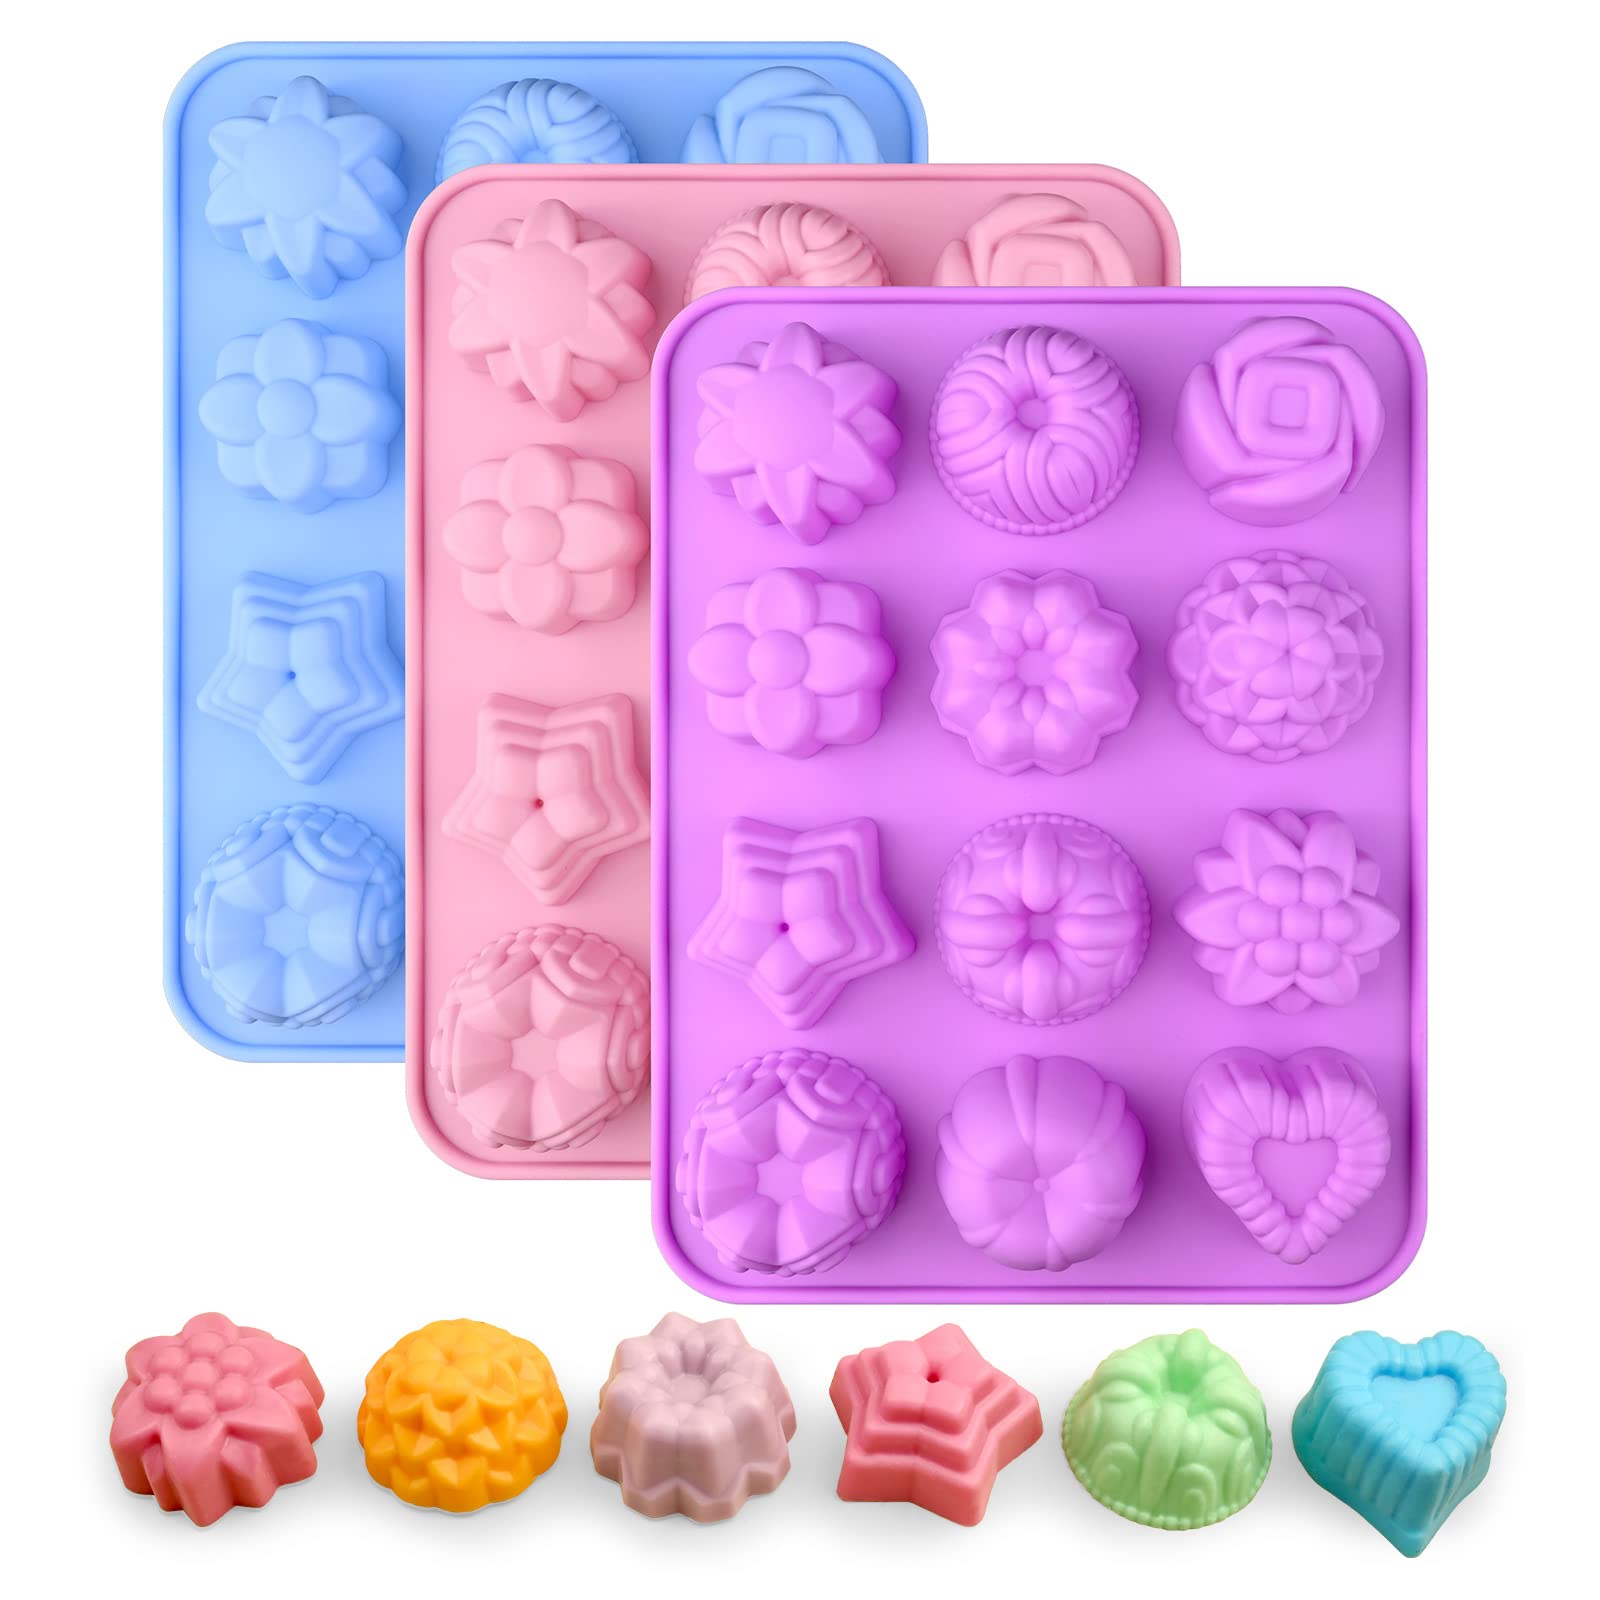 Sj Silicone Soap Molds - 12 Unique Patterns - Hand Soap Molds for Body, Baby, Kids, Baking Mold Cake Pan, Ice Cube Tray, BPA Free, Pack of 2